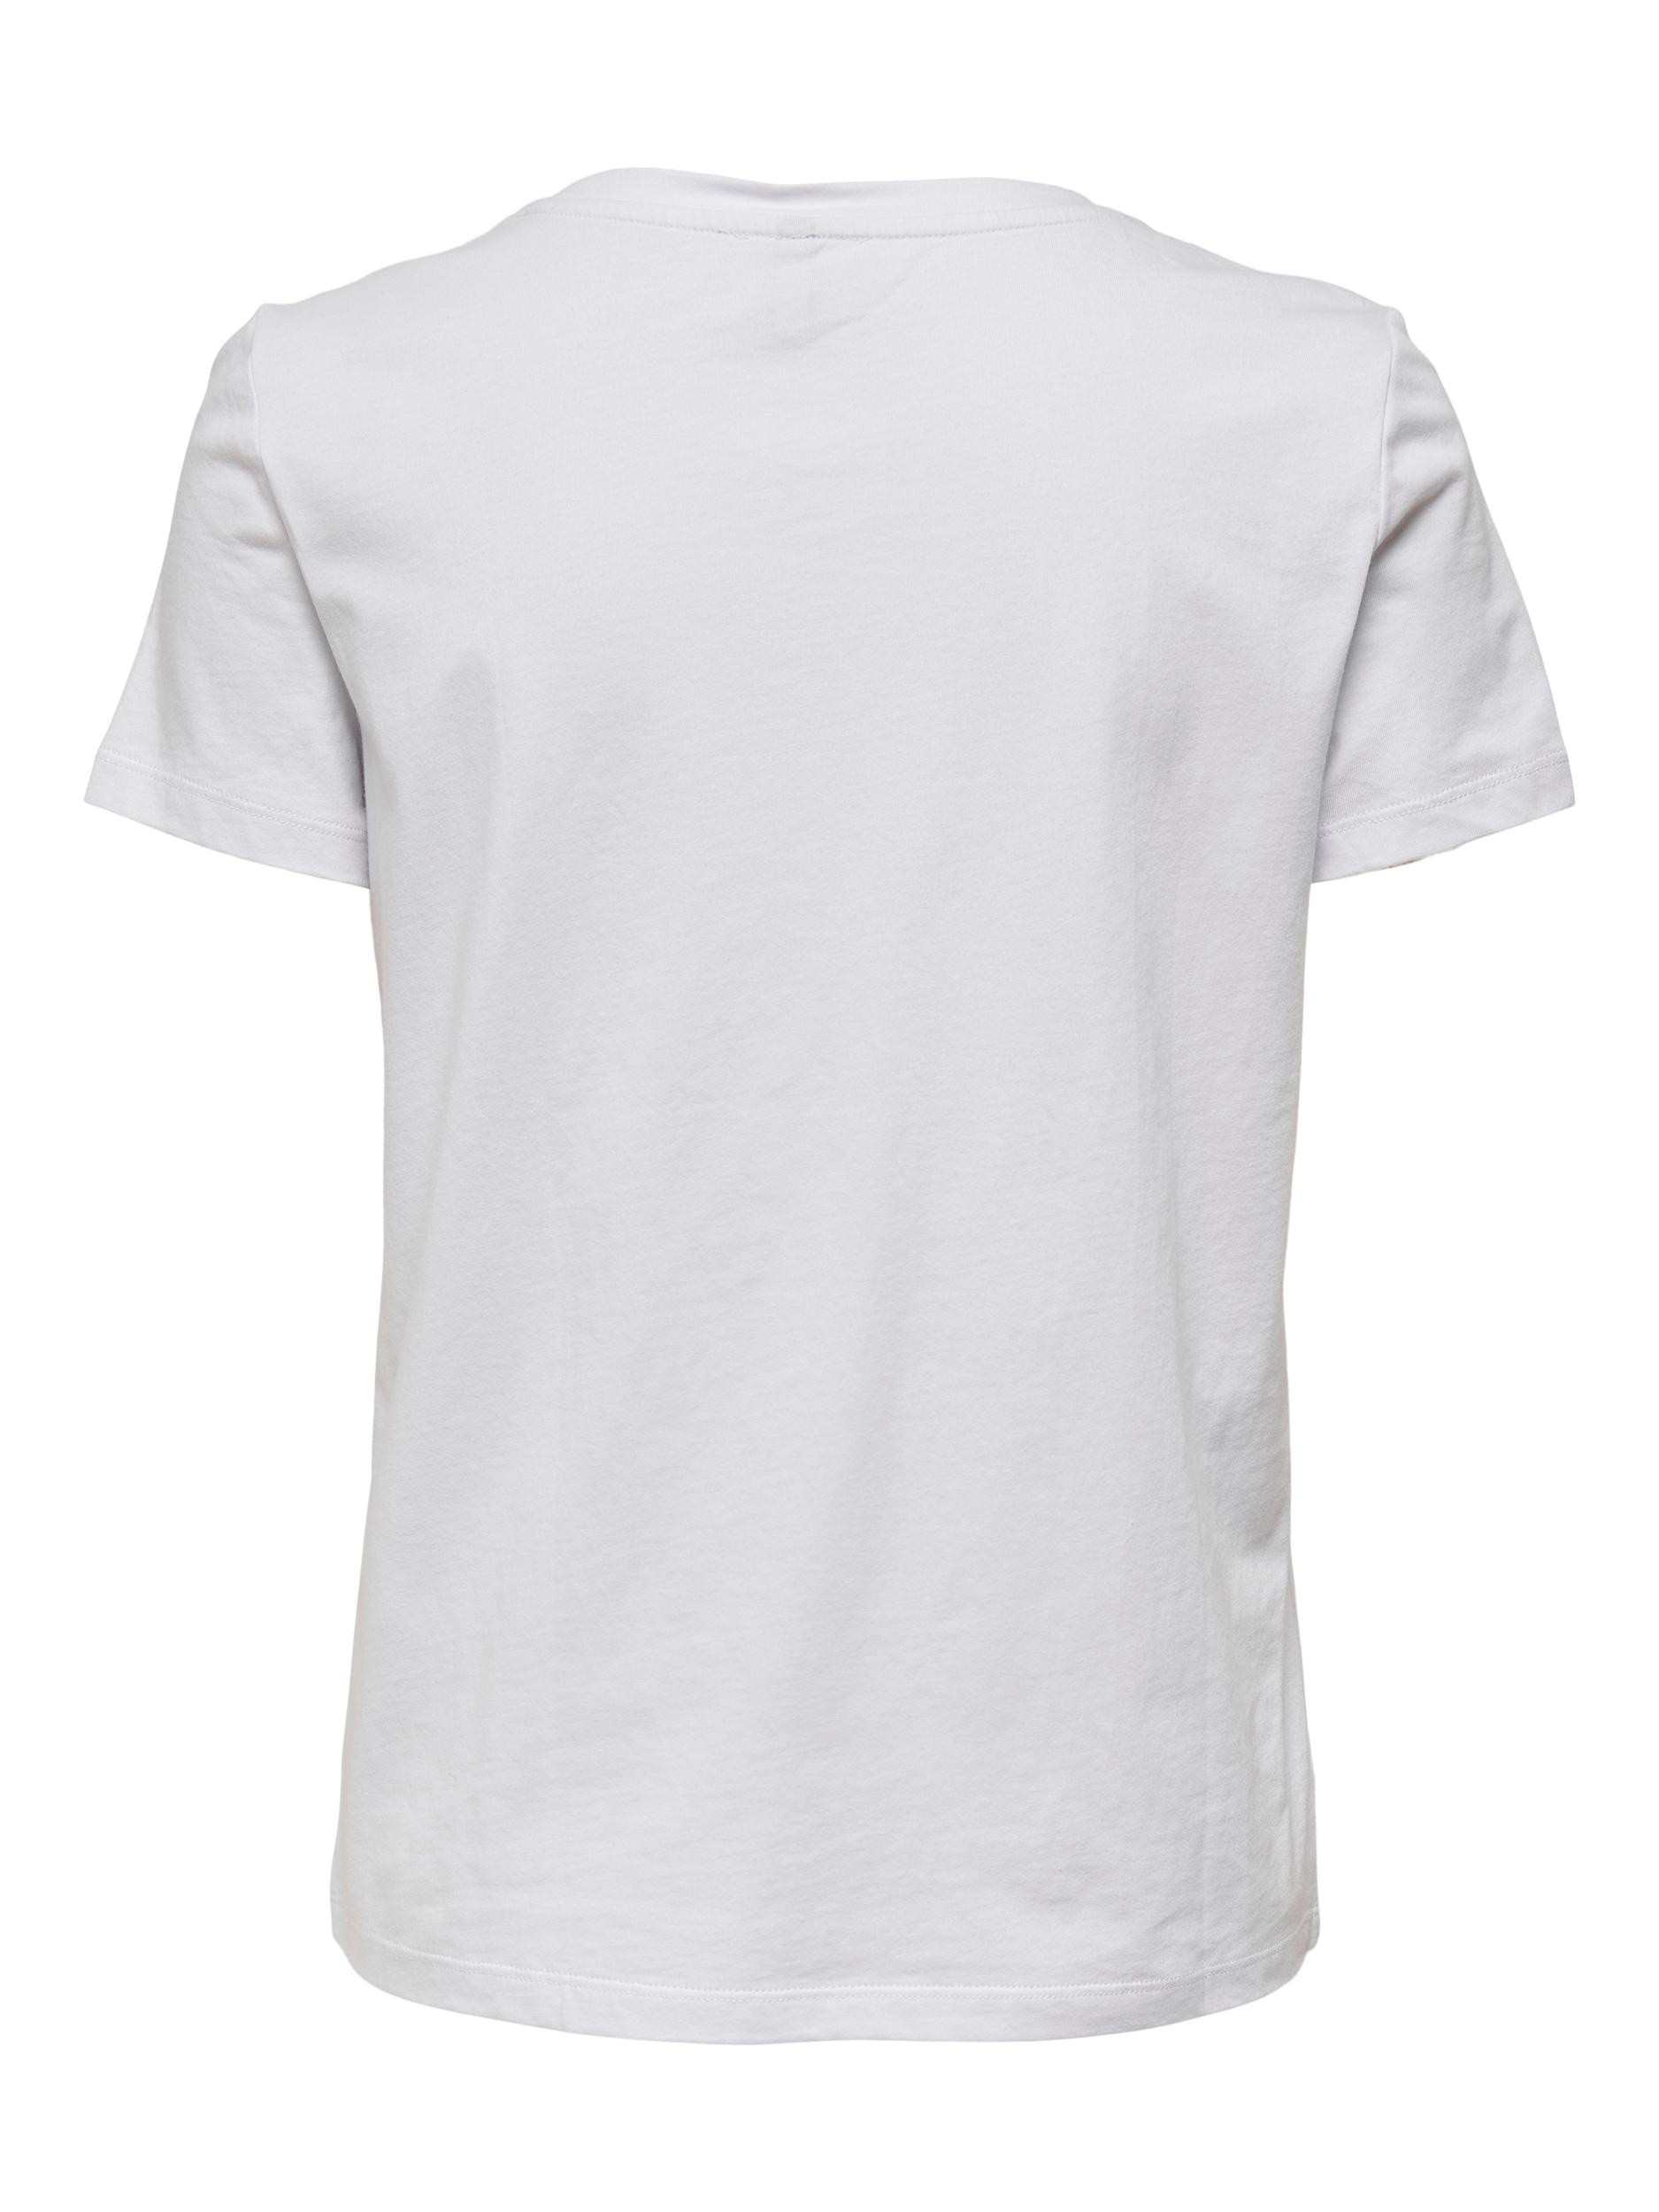 T-shirt with print, White, large image number 1